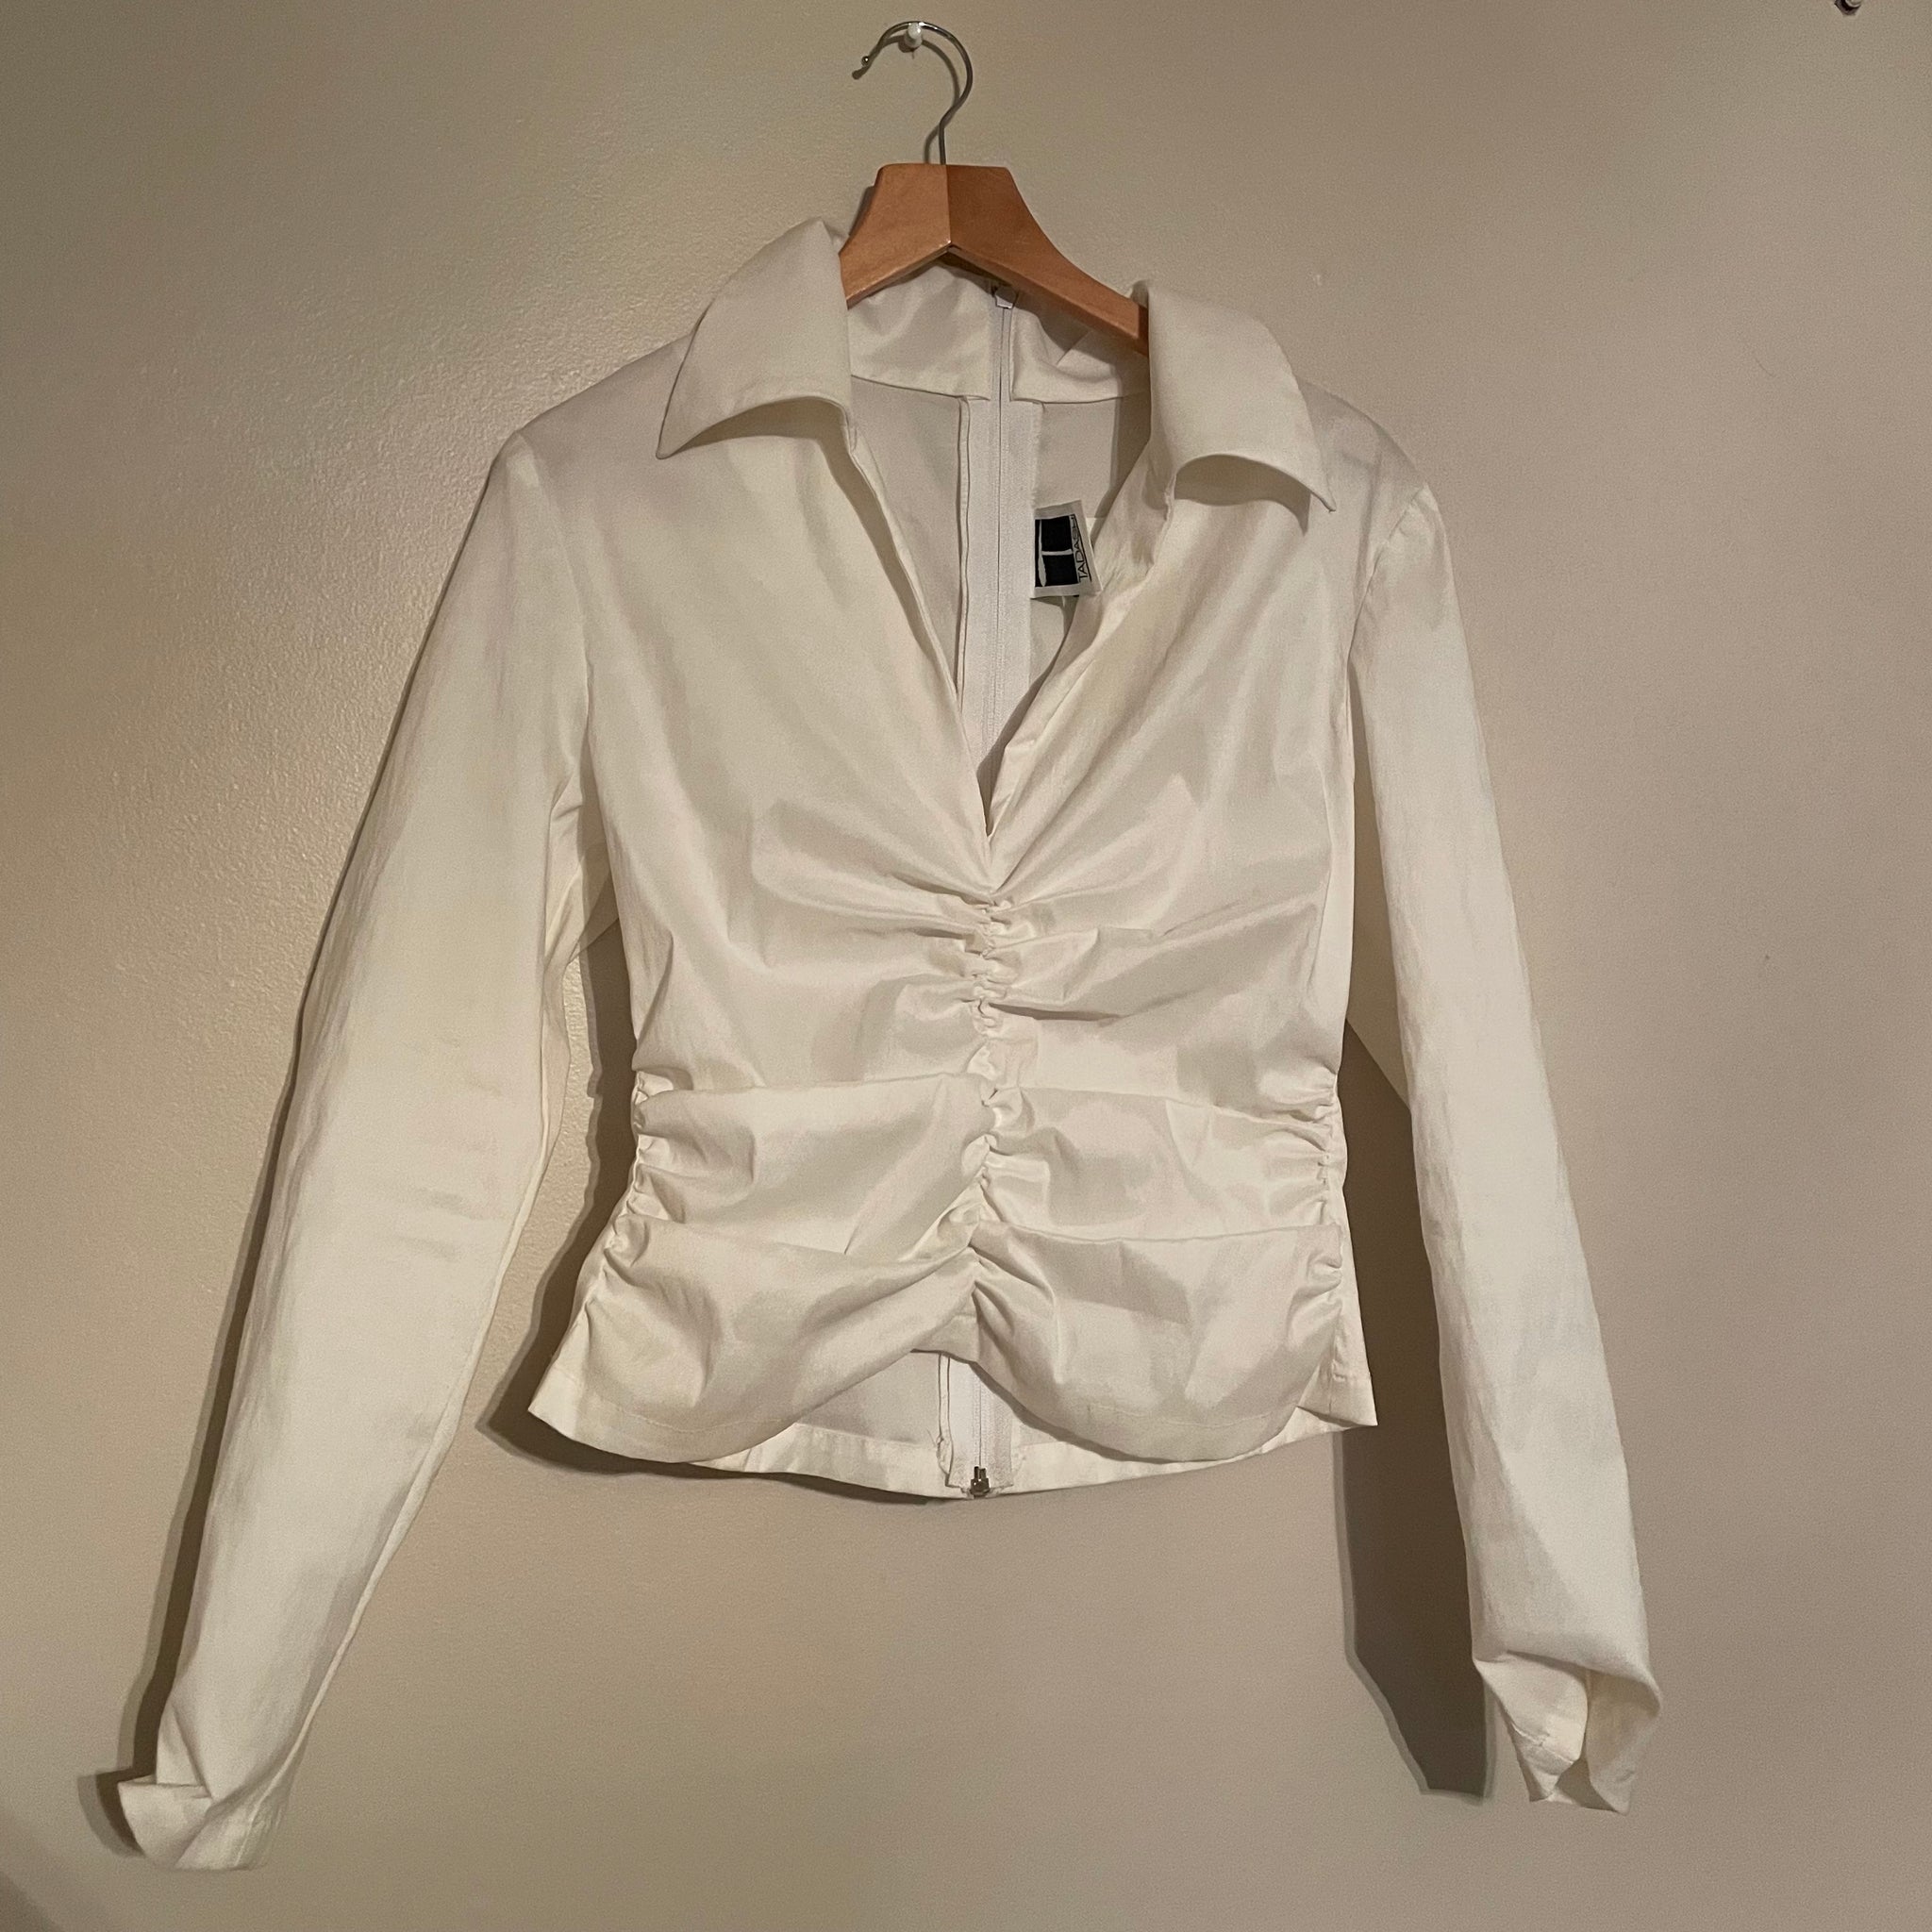 ‘Rosana’ White Ruched Collared Top (M)